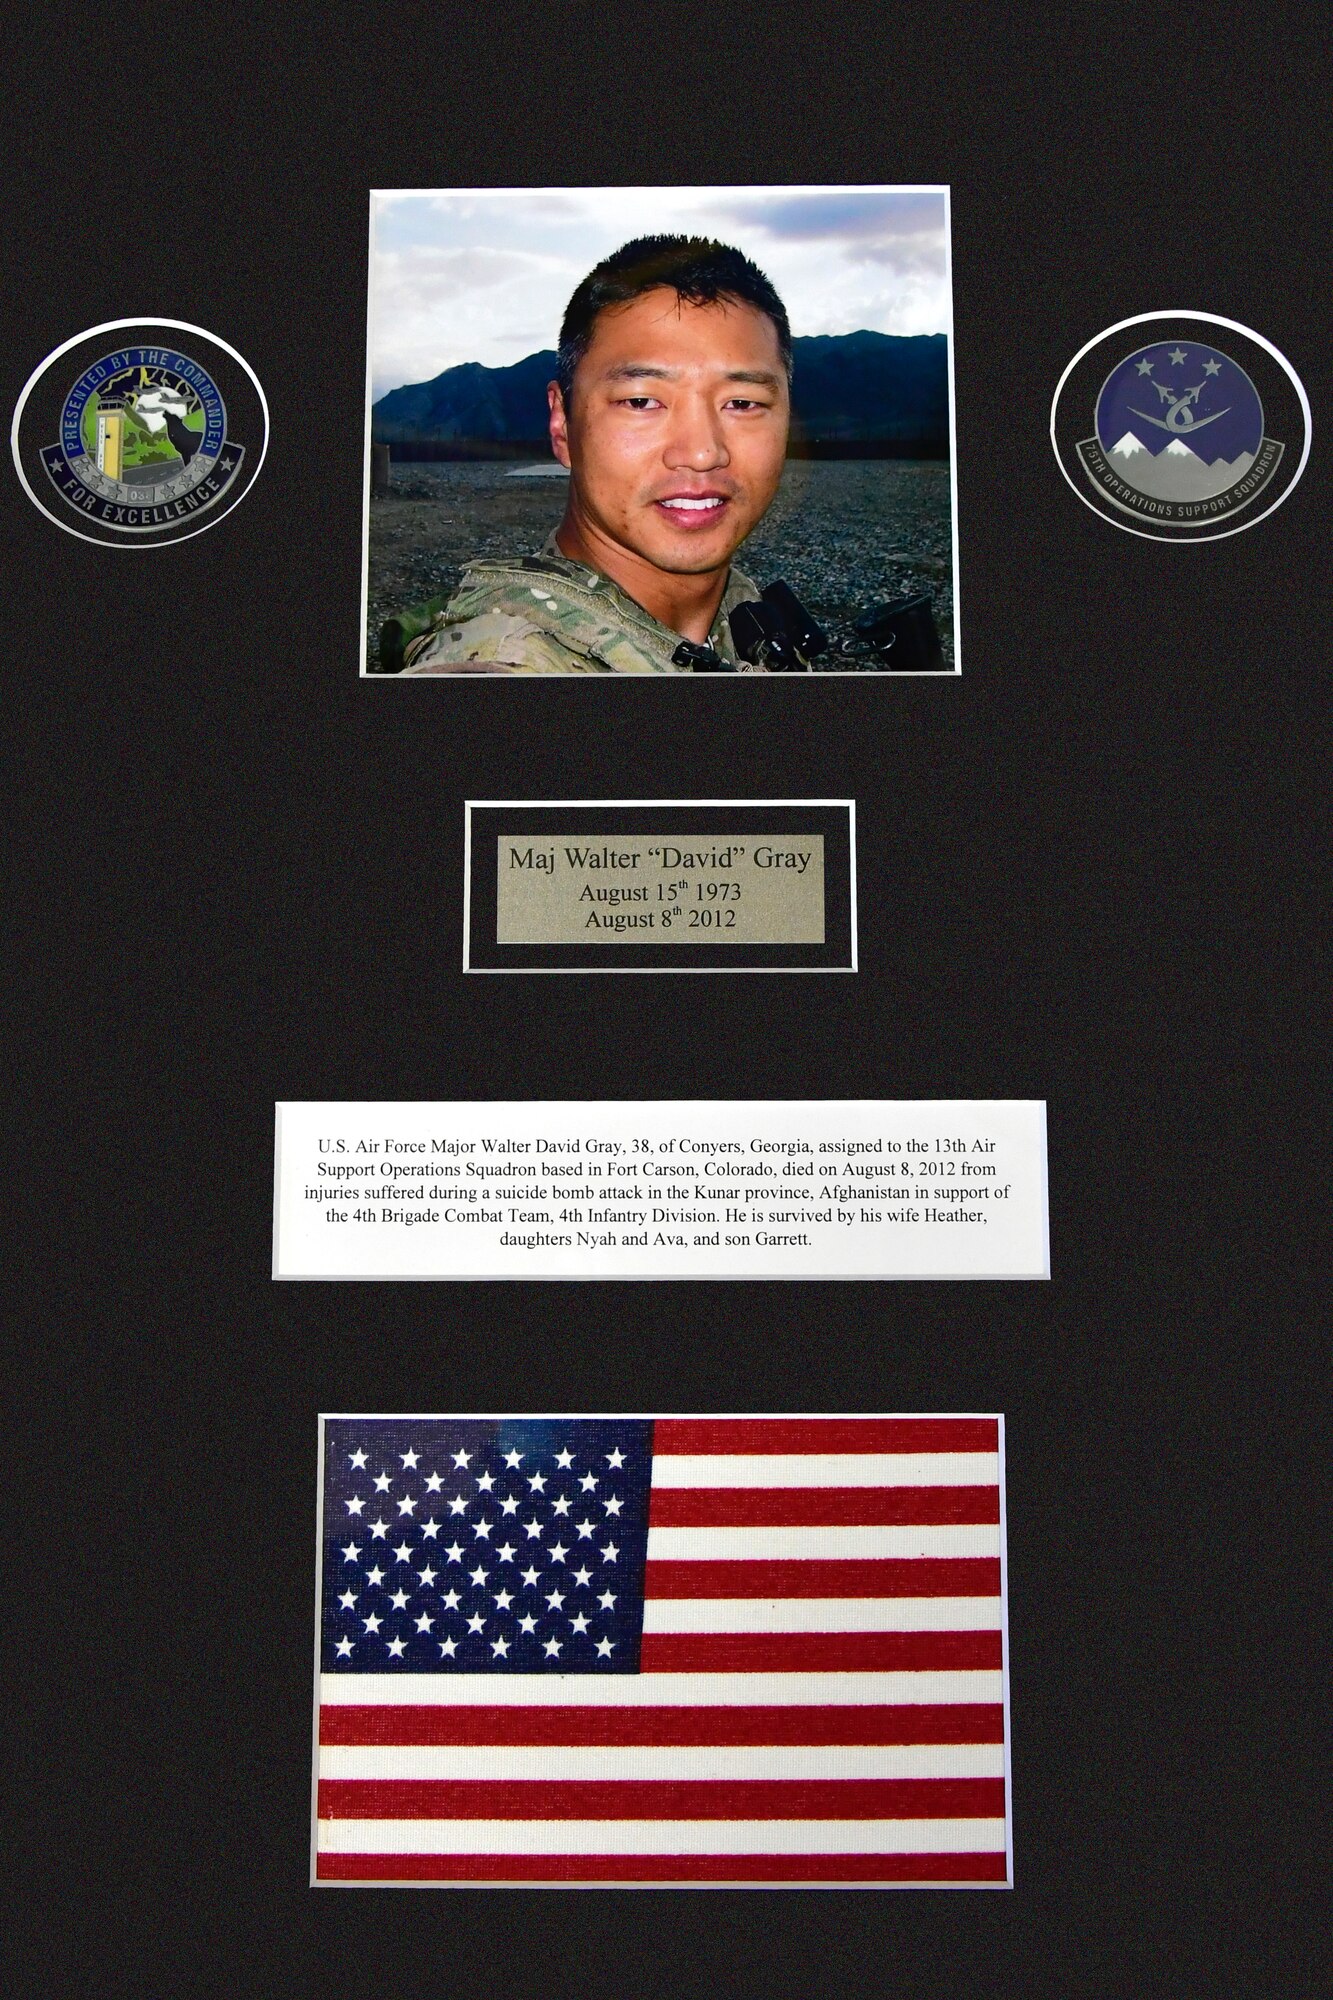 A memorial plaque for Maj. Walter “David” Gray March 3, 2021, Hill Air Force Base, Utah. The tribute will recognize Gray who lost his life in the service of our country while giving aid to fellow injured service members during the War in Afghanistan will be displayed in the 75th Operations Support Squadron Heritage Room. (U.S. Air Force photo by Todd Cromar)